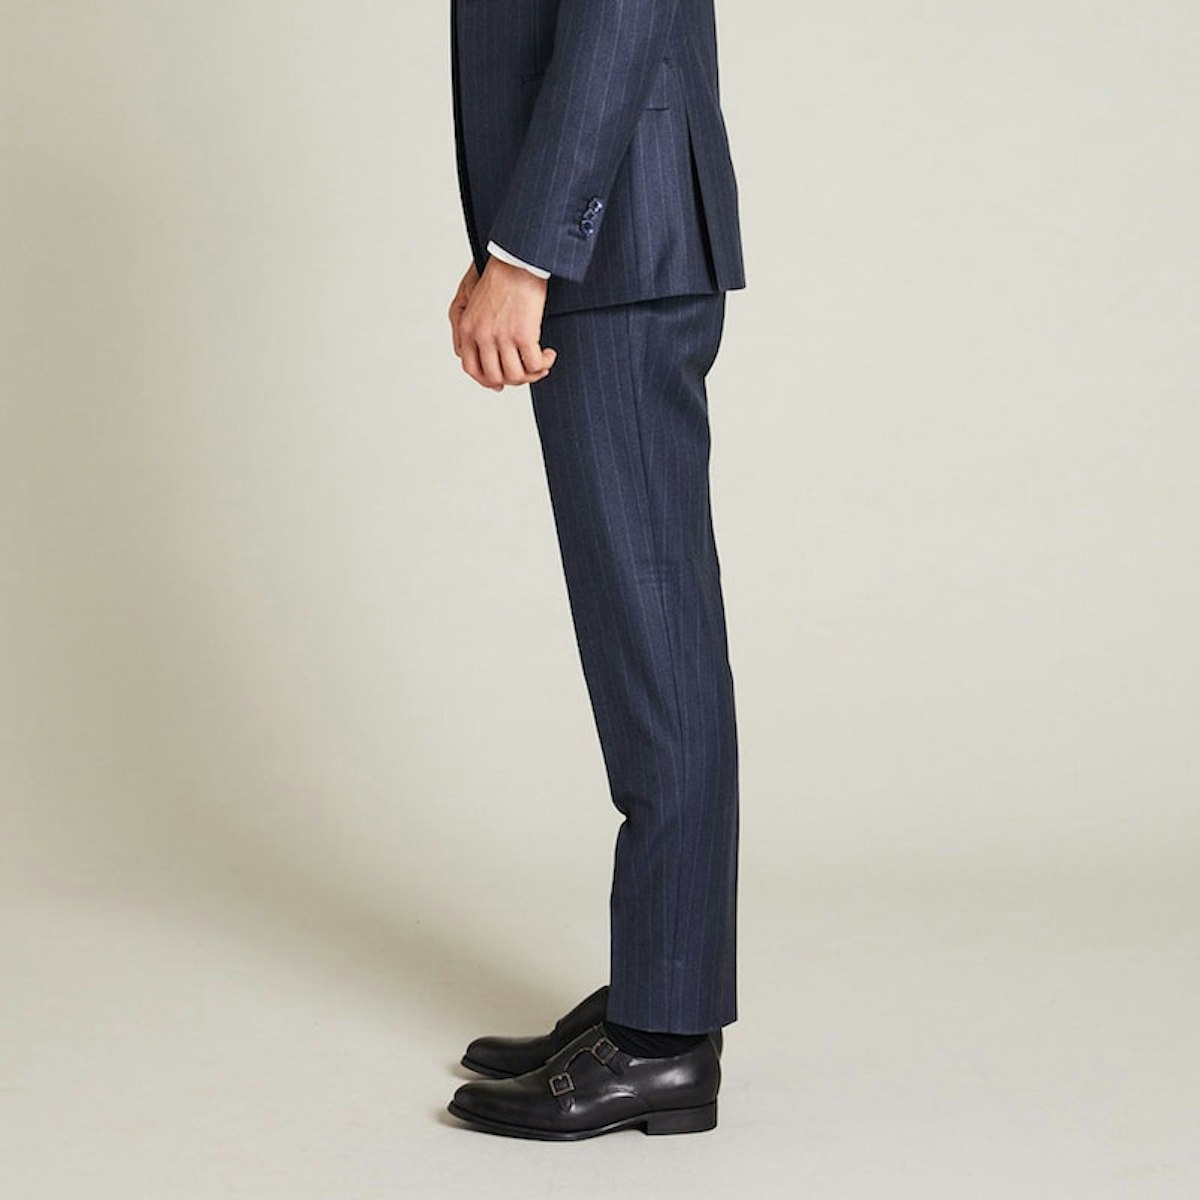 InStitchu Collection The Lander Navy Pinstripe Pants